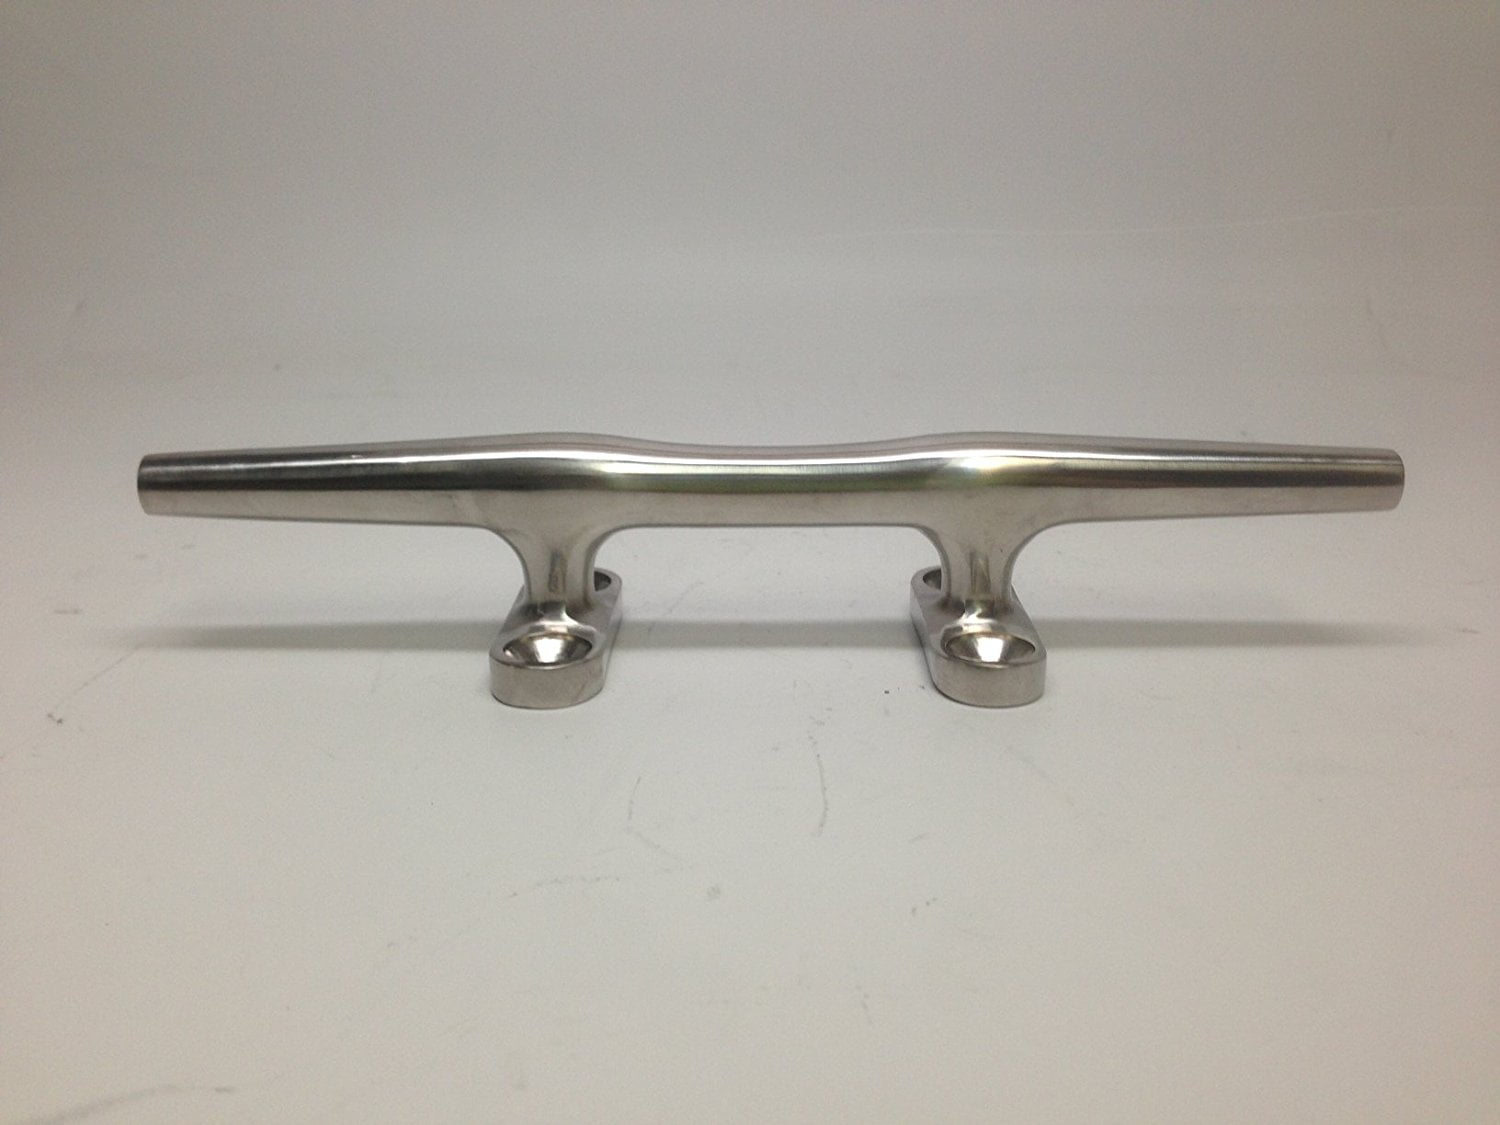 MARINE BOAT STAINLESS STEEL 8 INCH BOAT HERRESHOFF HOLLOW BASE CLEAT